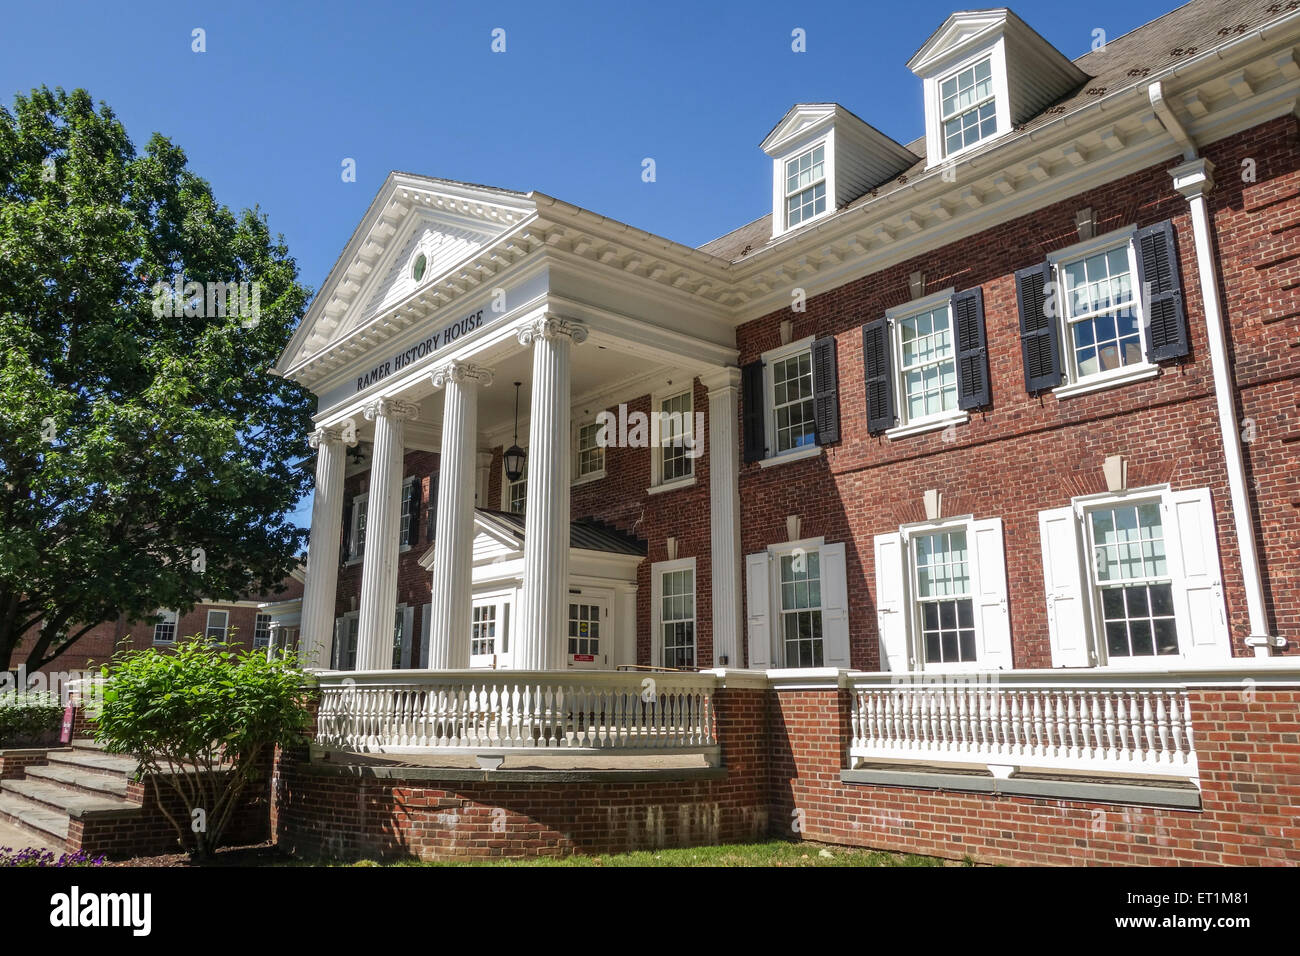 Ramer history house at campus, Lafayette College, private liberal arts college, Easton, Pennsylvania, USA. Stock Photo